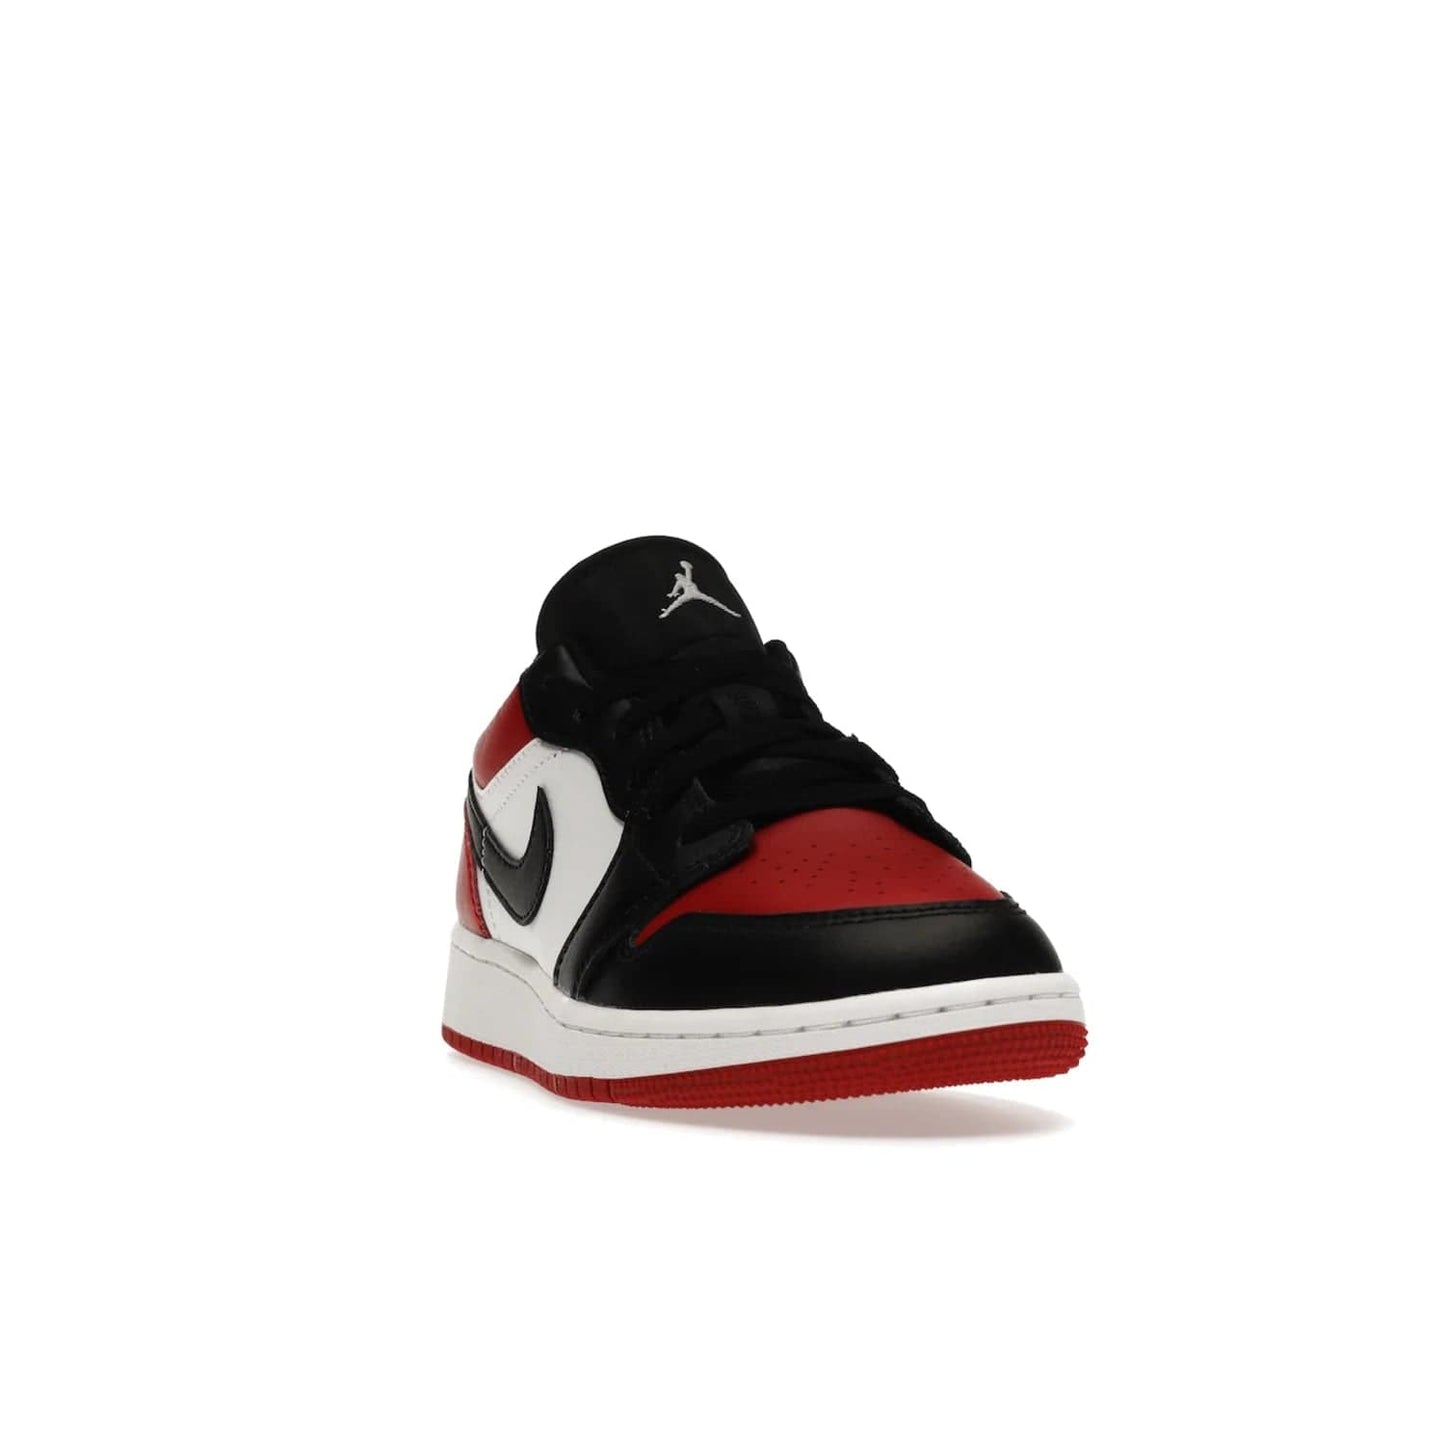 Jordan 1 Low Bred Toe (GS) - Image 8 - Only at www.BallersClubKickz.com - #
Iconic sneaker from Jordan brand with classic colorway, unique detailing & Air Jordan Wings logo. Step into the shoes of the greats with the Jordan 1 Low Bred Toe GS!